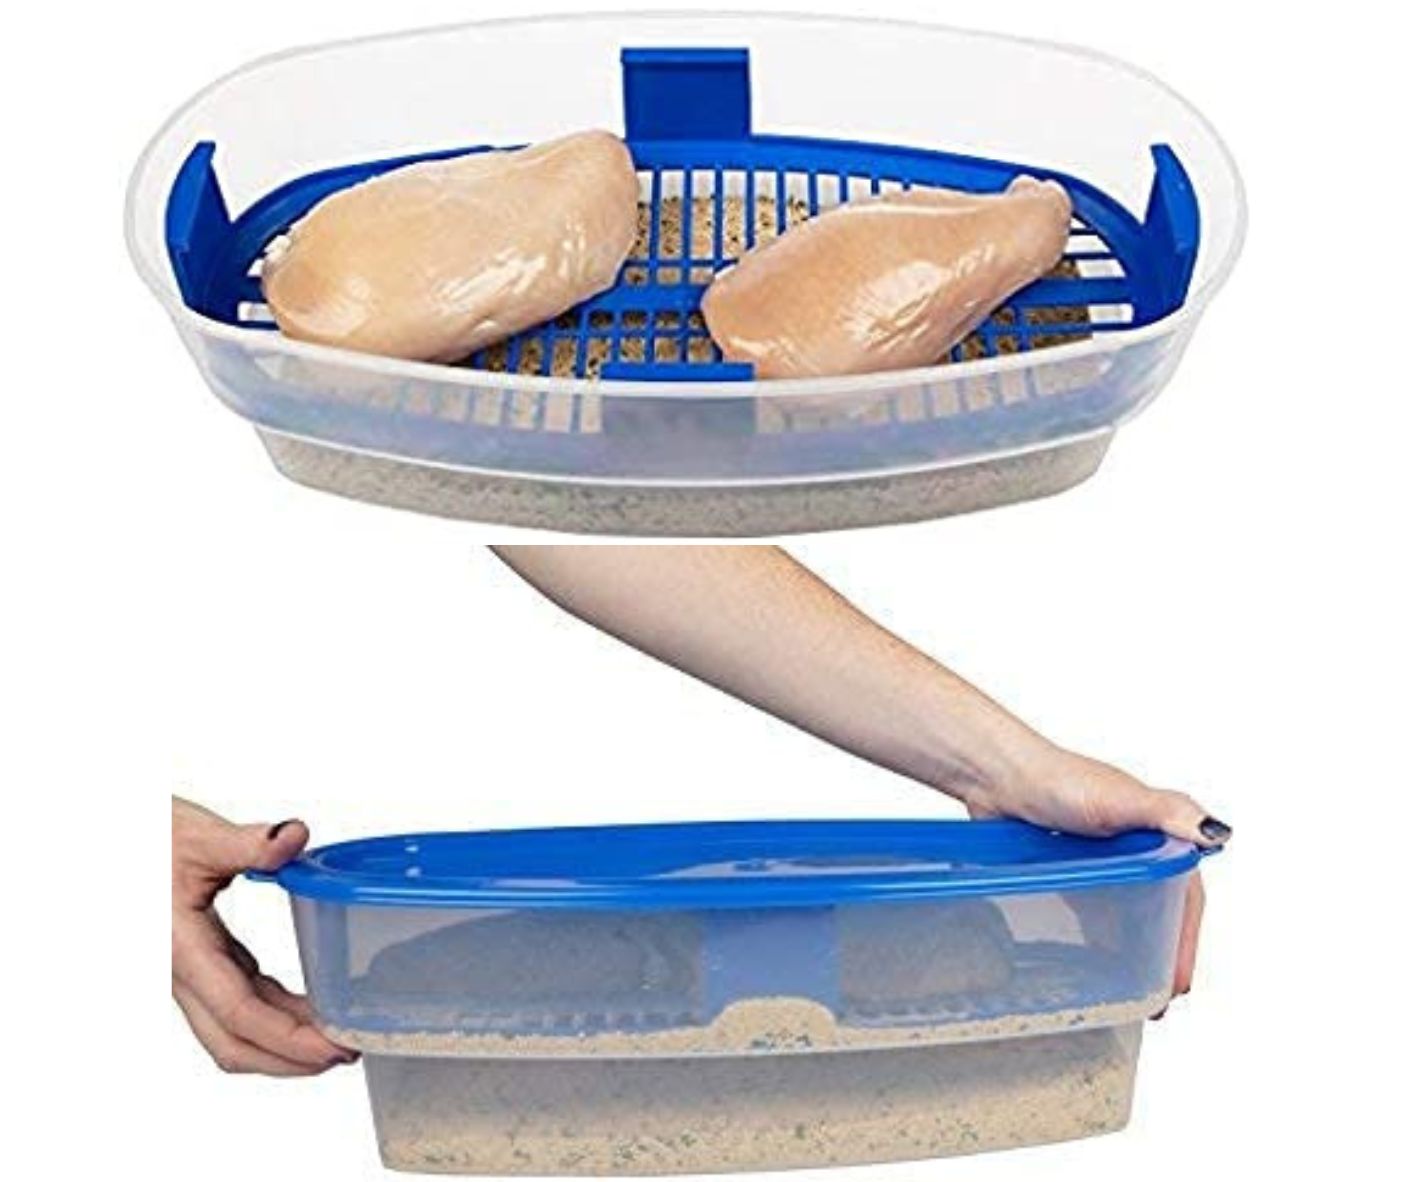 Reviewers Love This Better Breader Bowl For Making Fried Chicken And  Fish